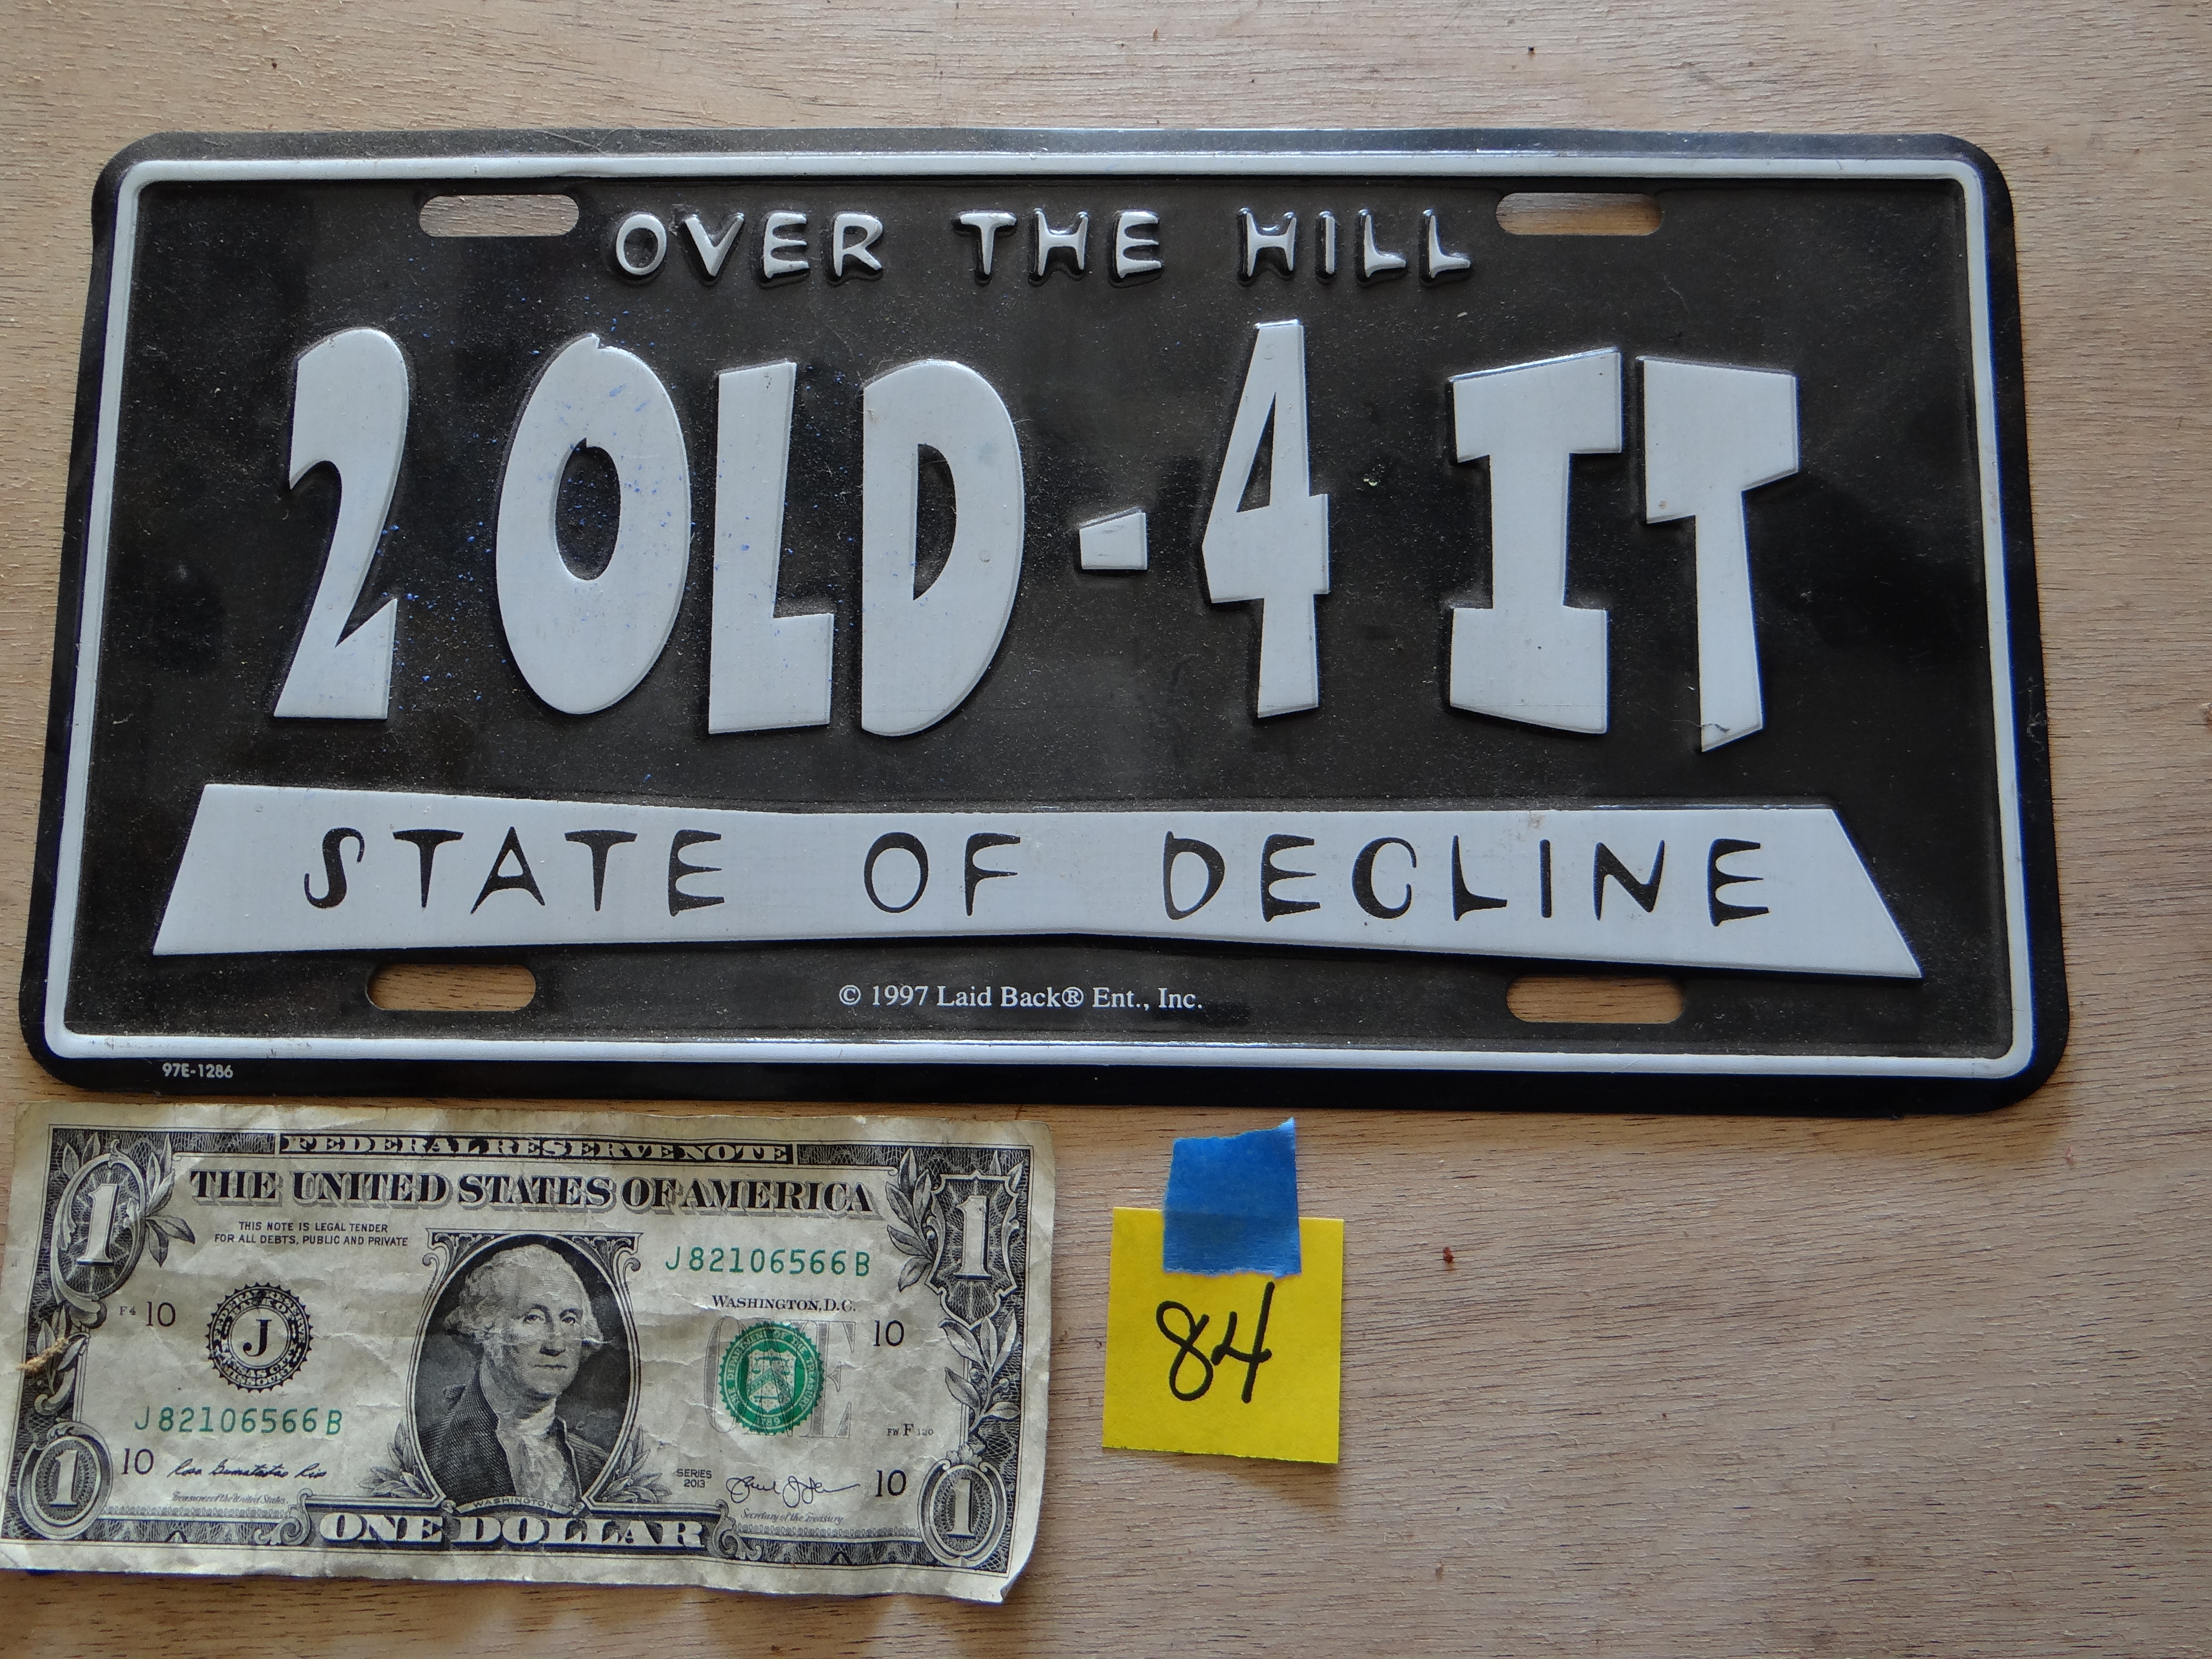 84-Funny License Plate Sign '2 Old-4 It State of Decline'